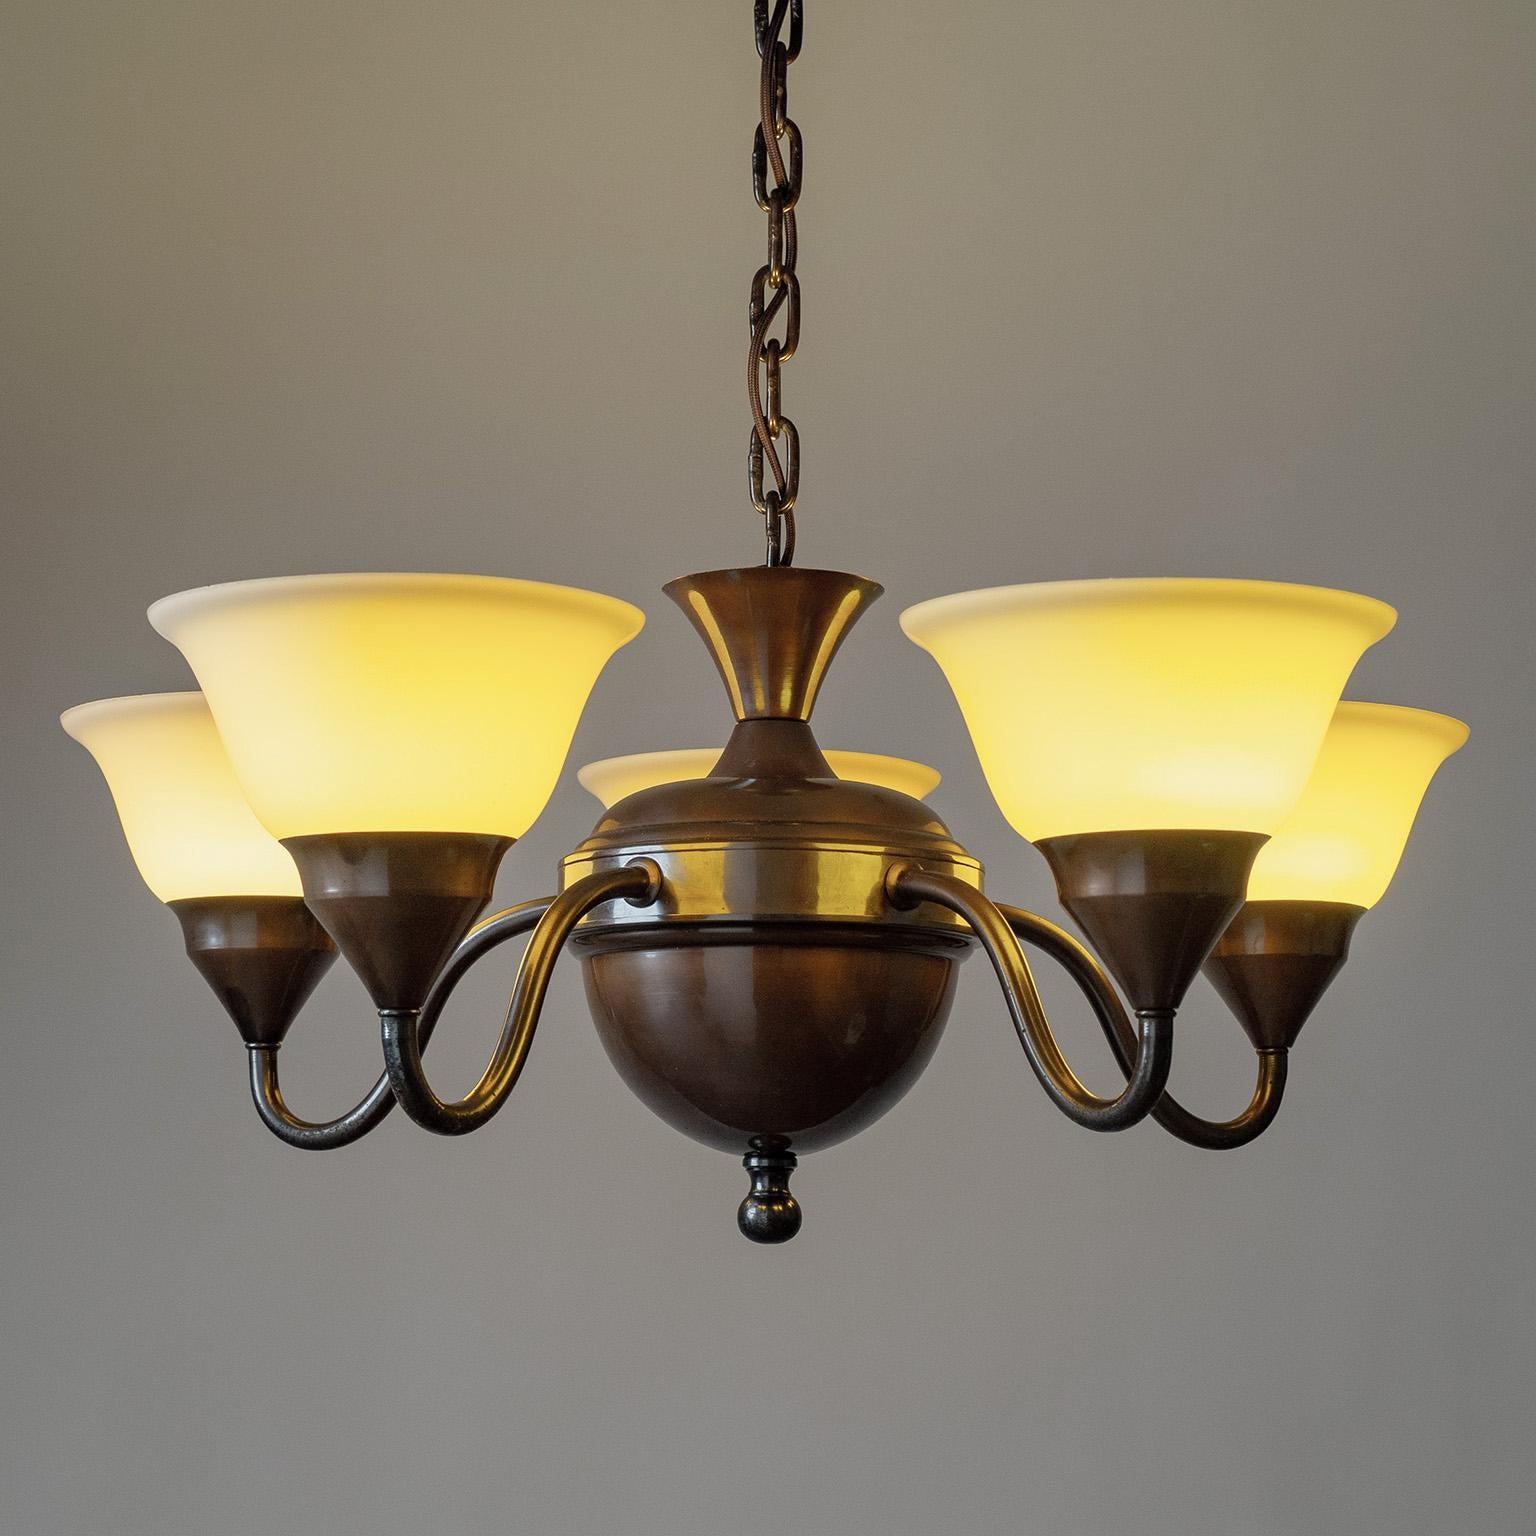 Art Deco Swedish Patinated Brass Chandelier, 1920s, Enameled Glass For Sale